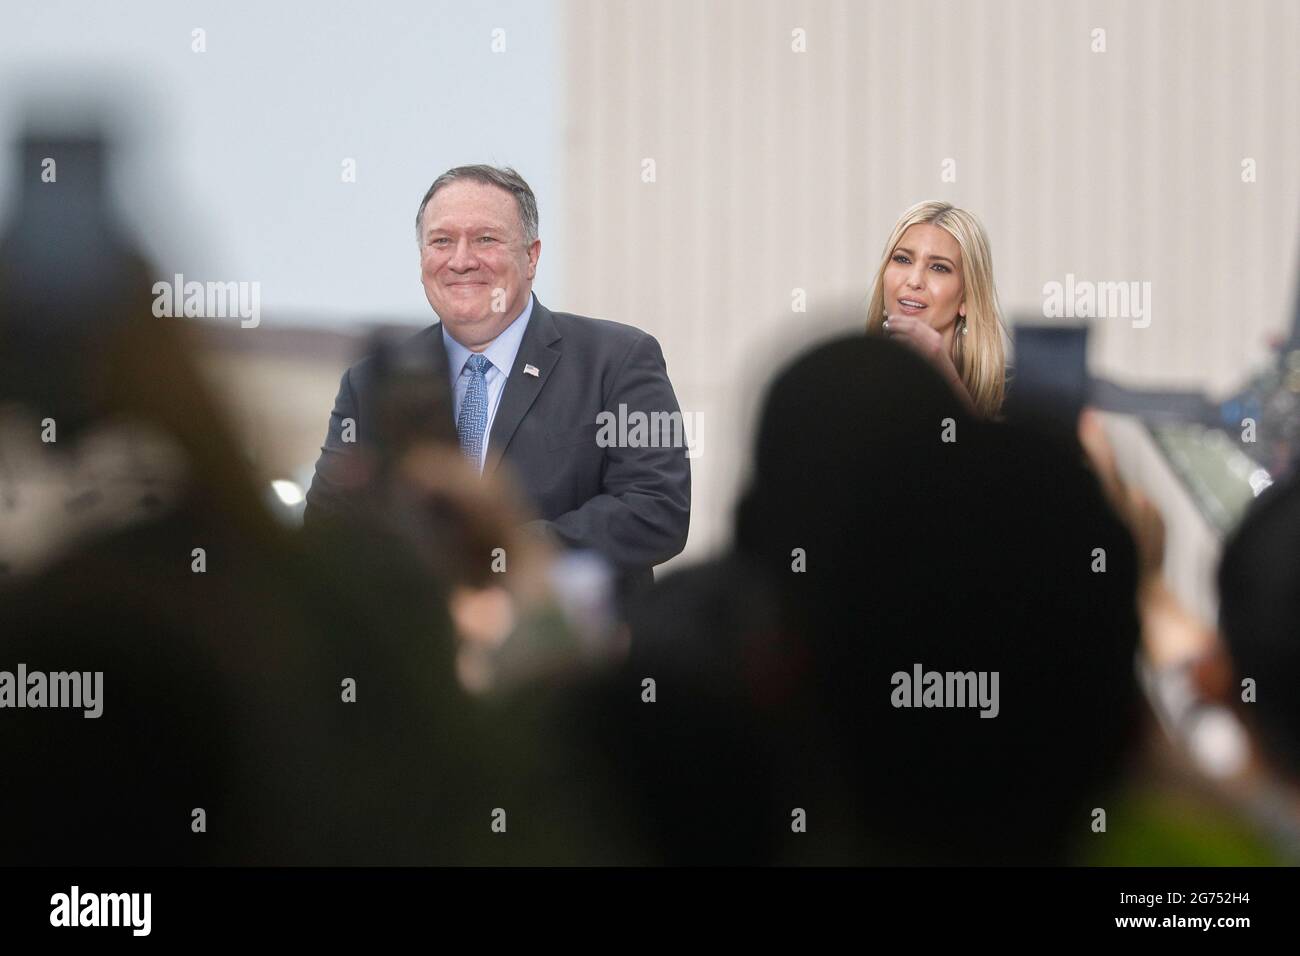 June 30, 2019-Osan, South Korea-US Secretary mike pompeo and Ivanka Trump attends for their US military meeting event at Osan Military Airbase, South Korea. Stock Photo